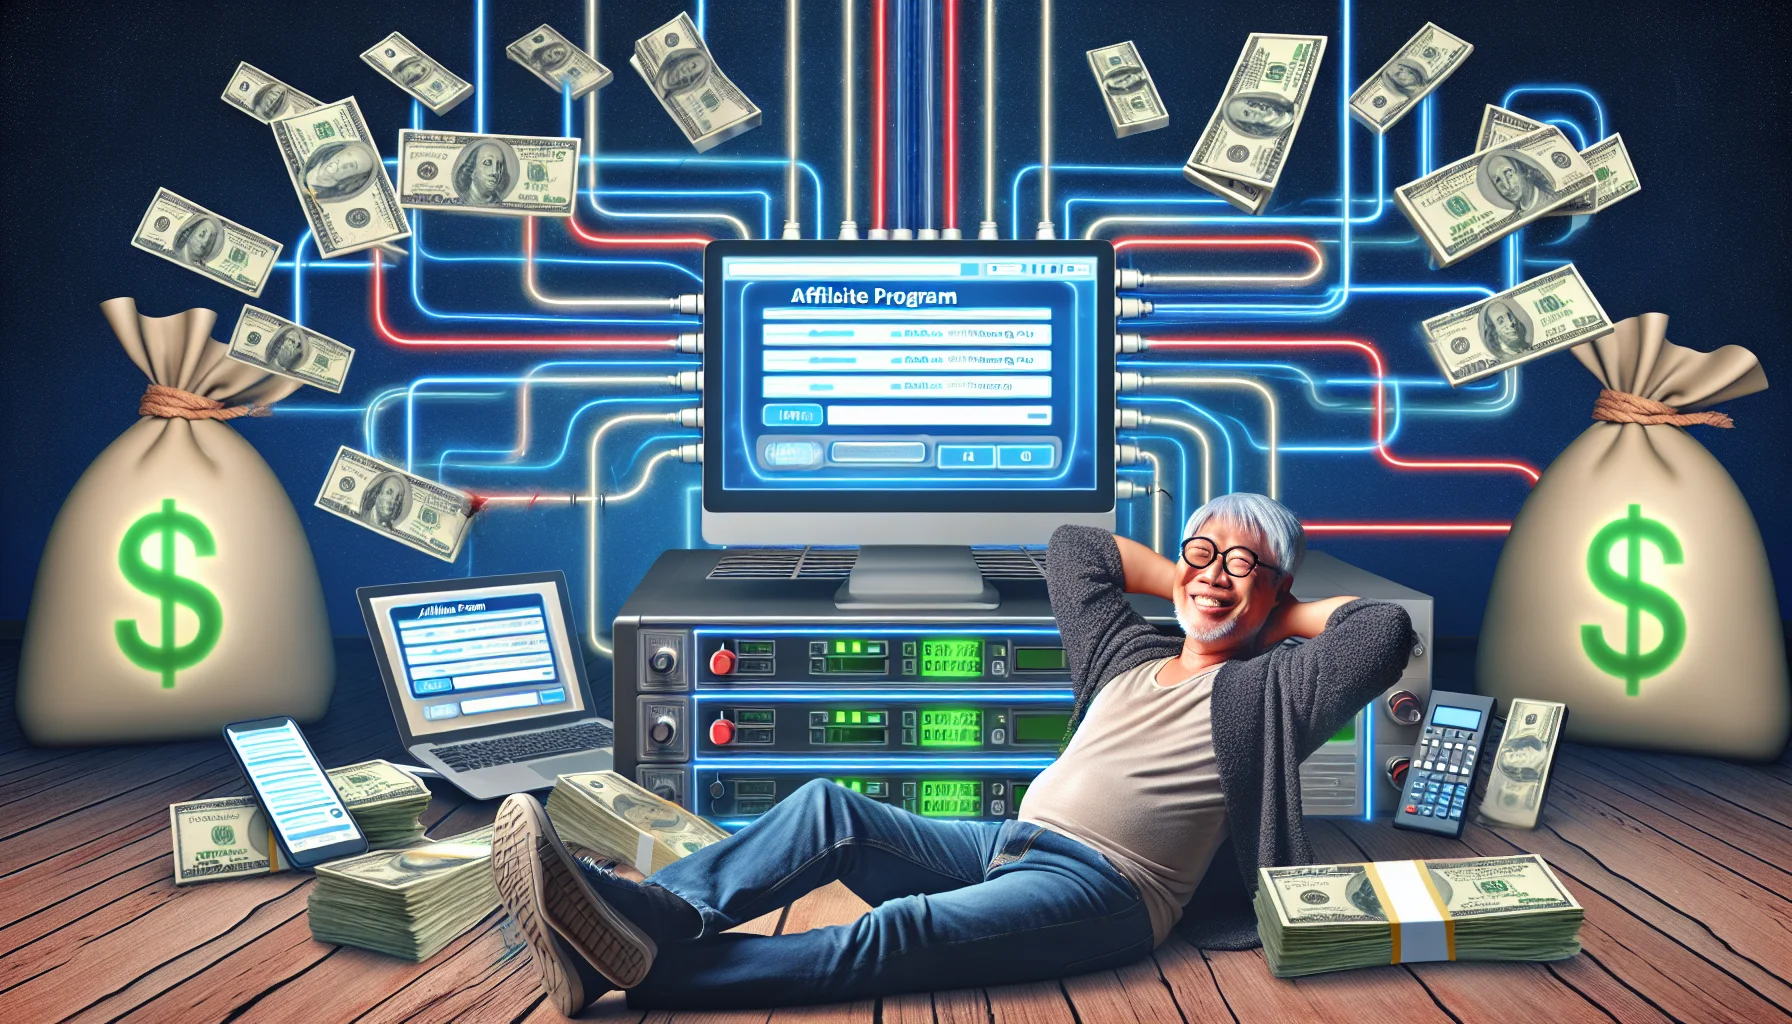 A captivating, humorous image depicting an online monetary system, focusing on an affiliate program. The surrounding scene features an array of tech gadgets, including laptops, mobile devices, and dollar-bill infused ethernet cables connecting them all, signifying the cash flow. The central computer screen is aglow with the buttons and sliders of the affiliate program, showing real-time earnings growth. A jubilant middle-aged Asian male in casual attire lounges confidently nearby, a gleaming smile of satisfaction on his face as he watches the operation.